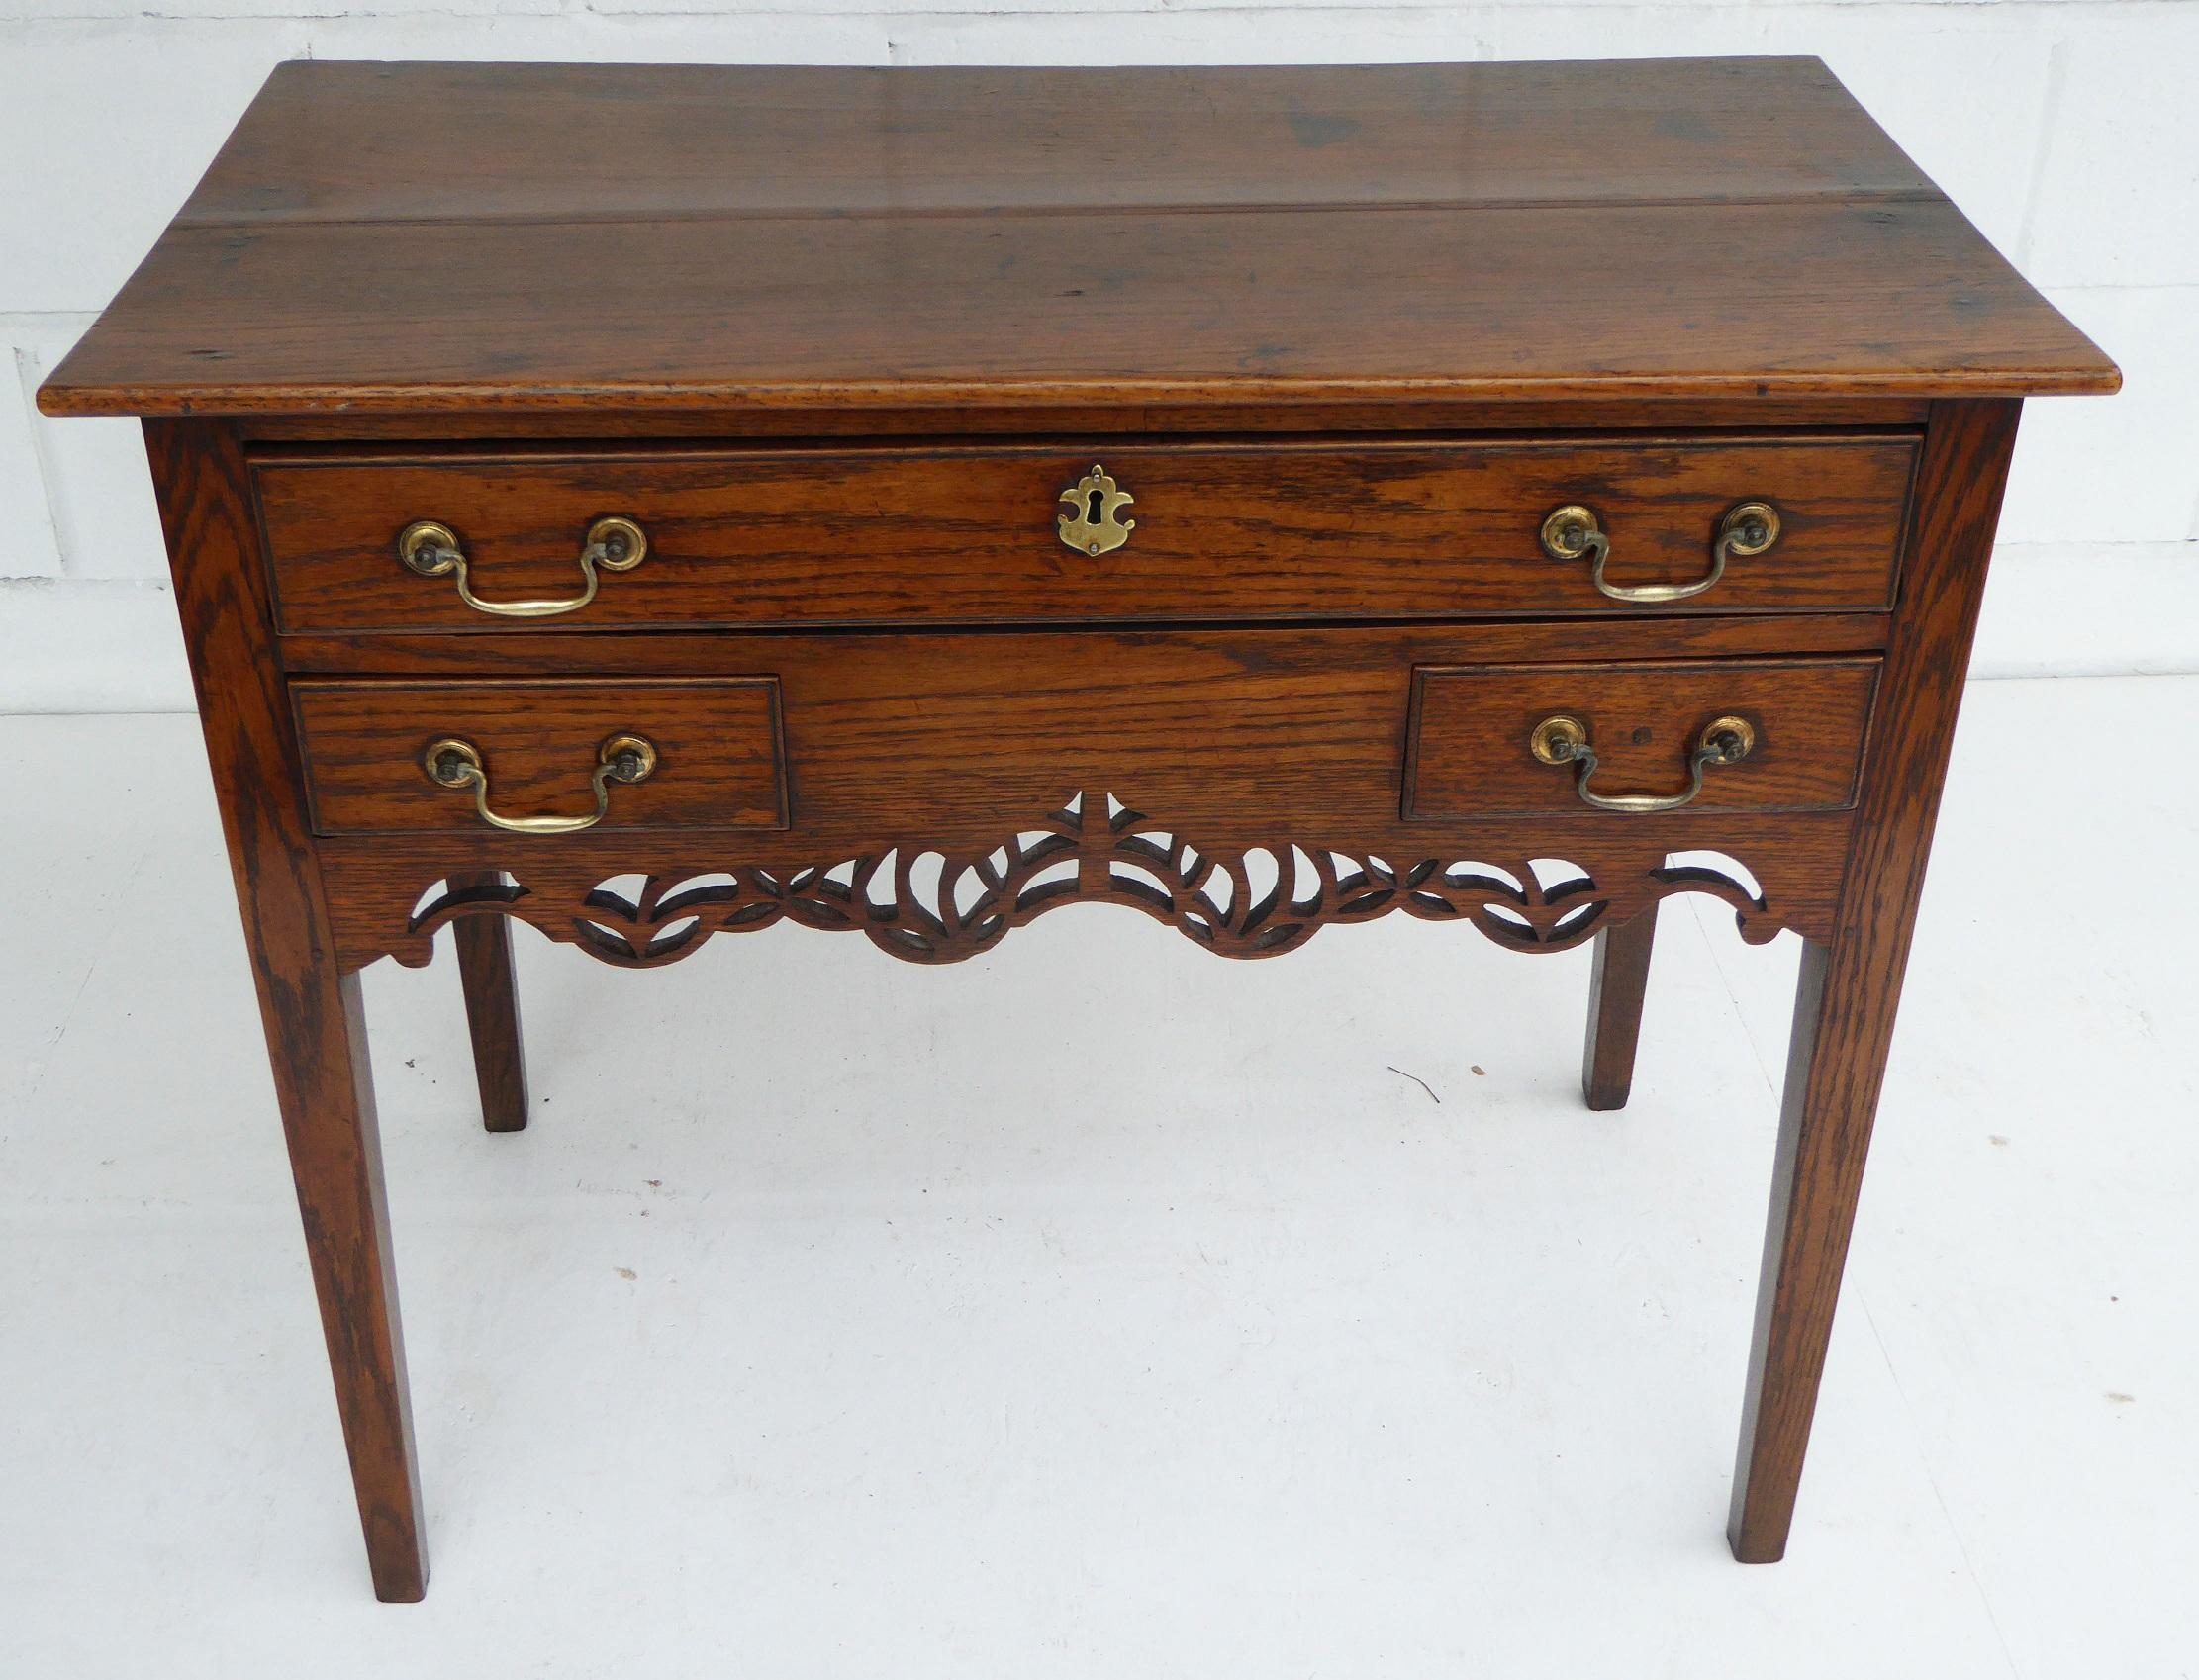 For sale is a good quality 18th century oak lowboy. This piece has an arrangement of four drawers, one long drawer at the top with one short drawer below on either side. Below this is an ornate fretwork frieze. The lowboy stands on four square